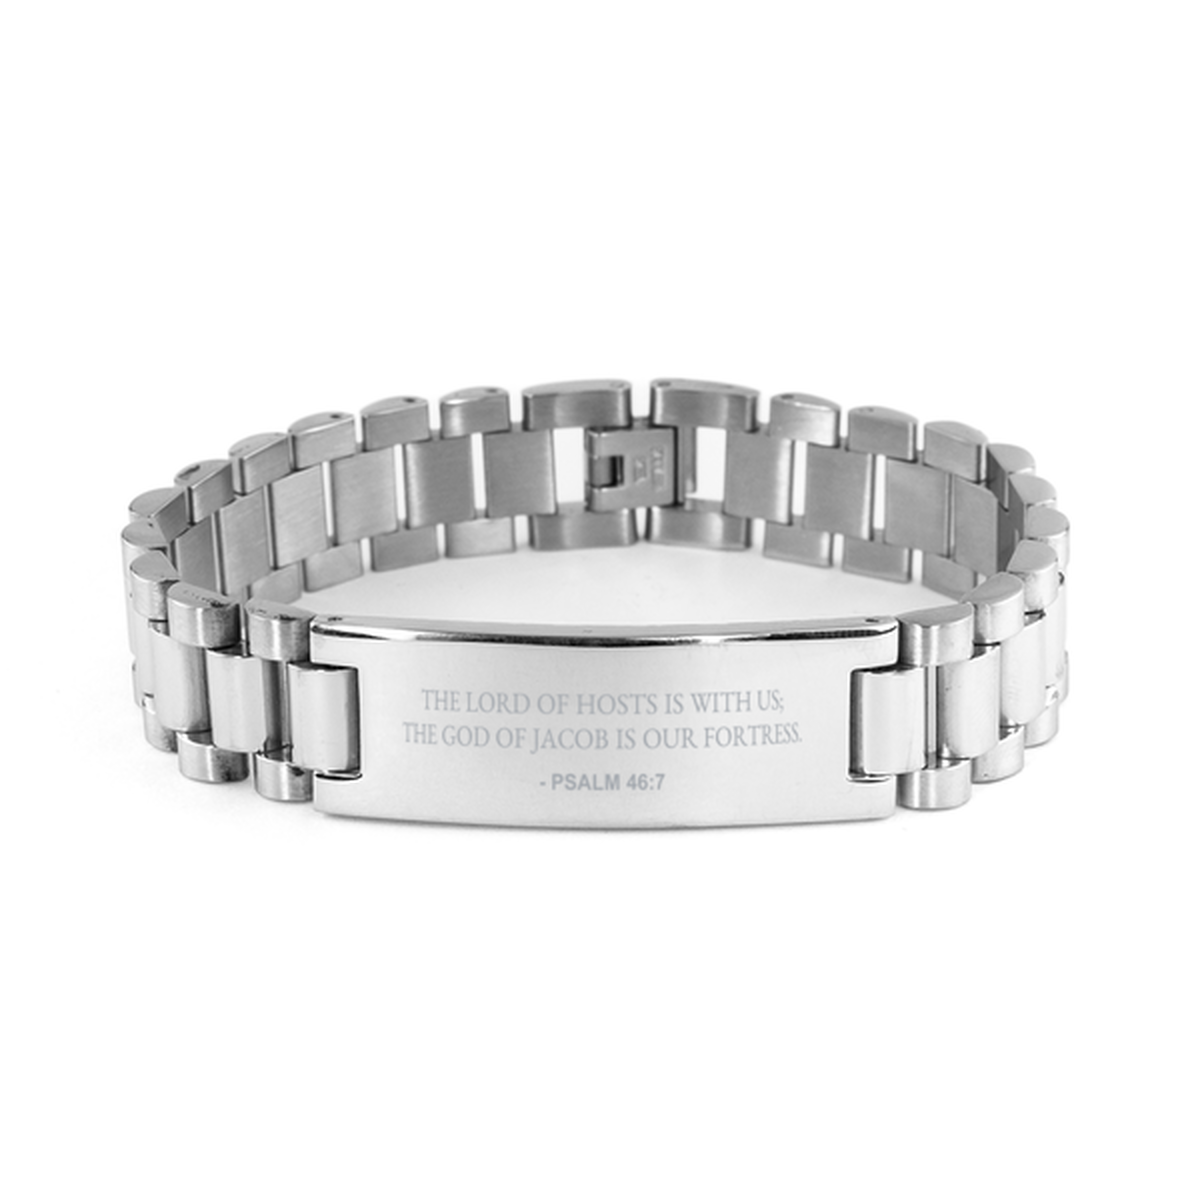 Christian Ladder Stainless Steel Bracelet, Psalm 46:7 The Lord Of Hosts Is With Us; The God Of Jacob Is, Motivational Bible Verse Gifts For Men Women